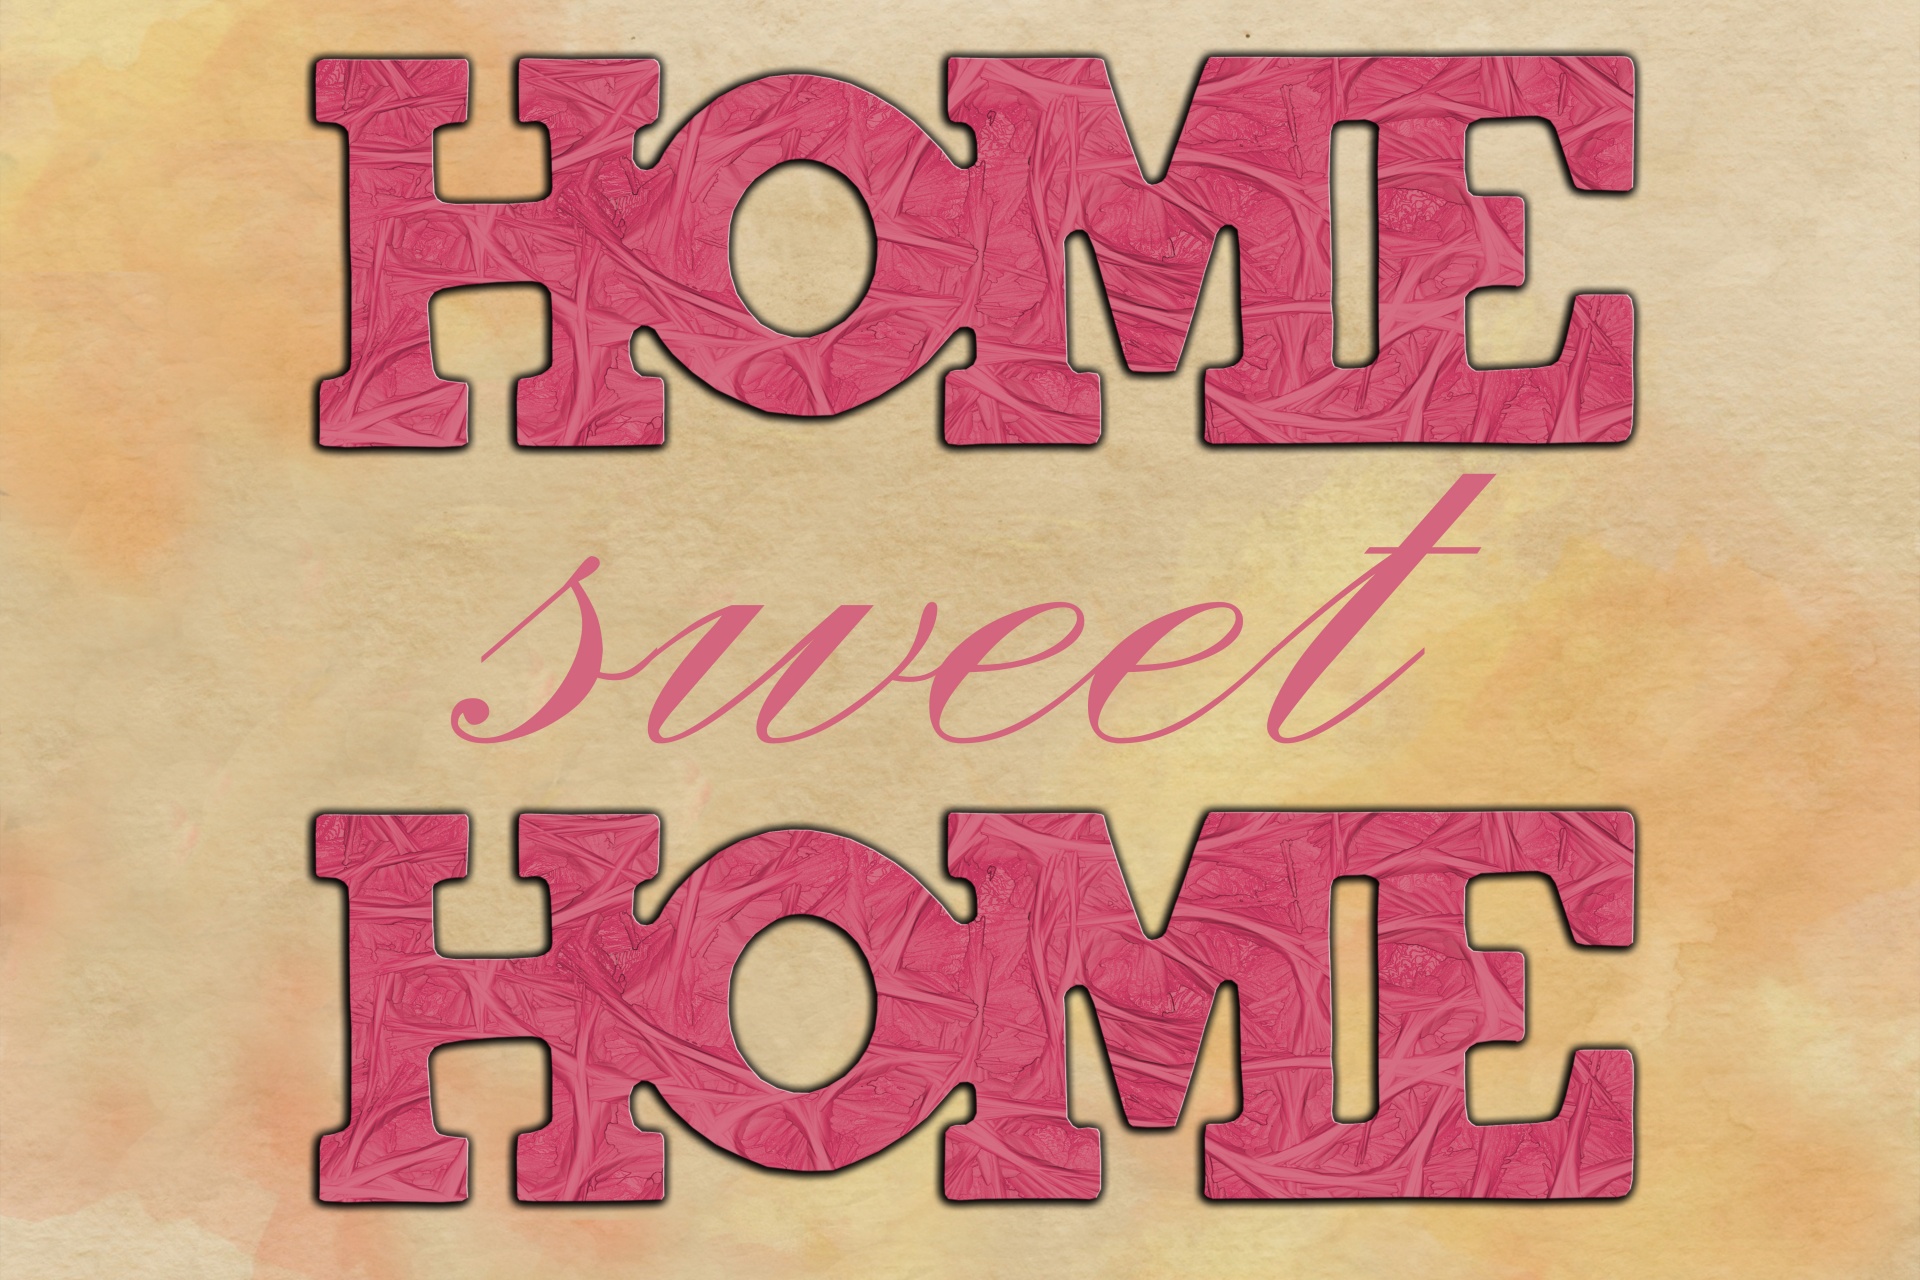 Red home sweet home text on vintage background